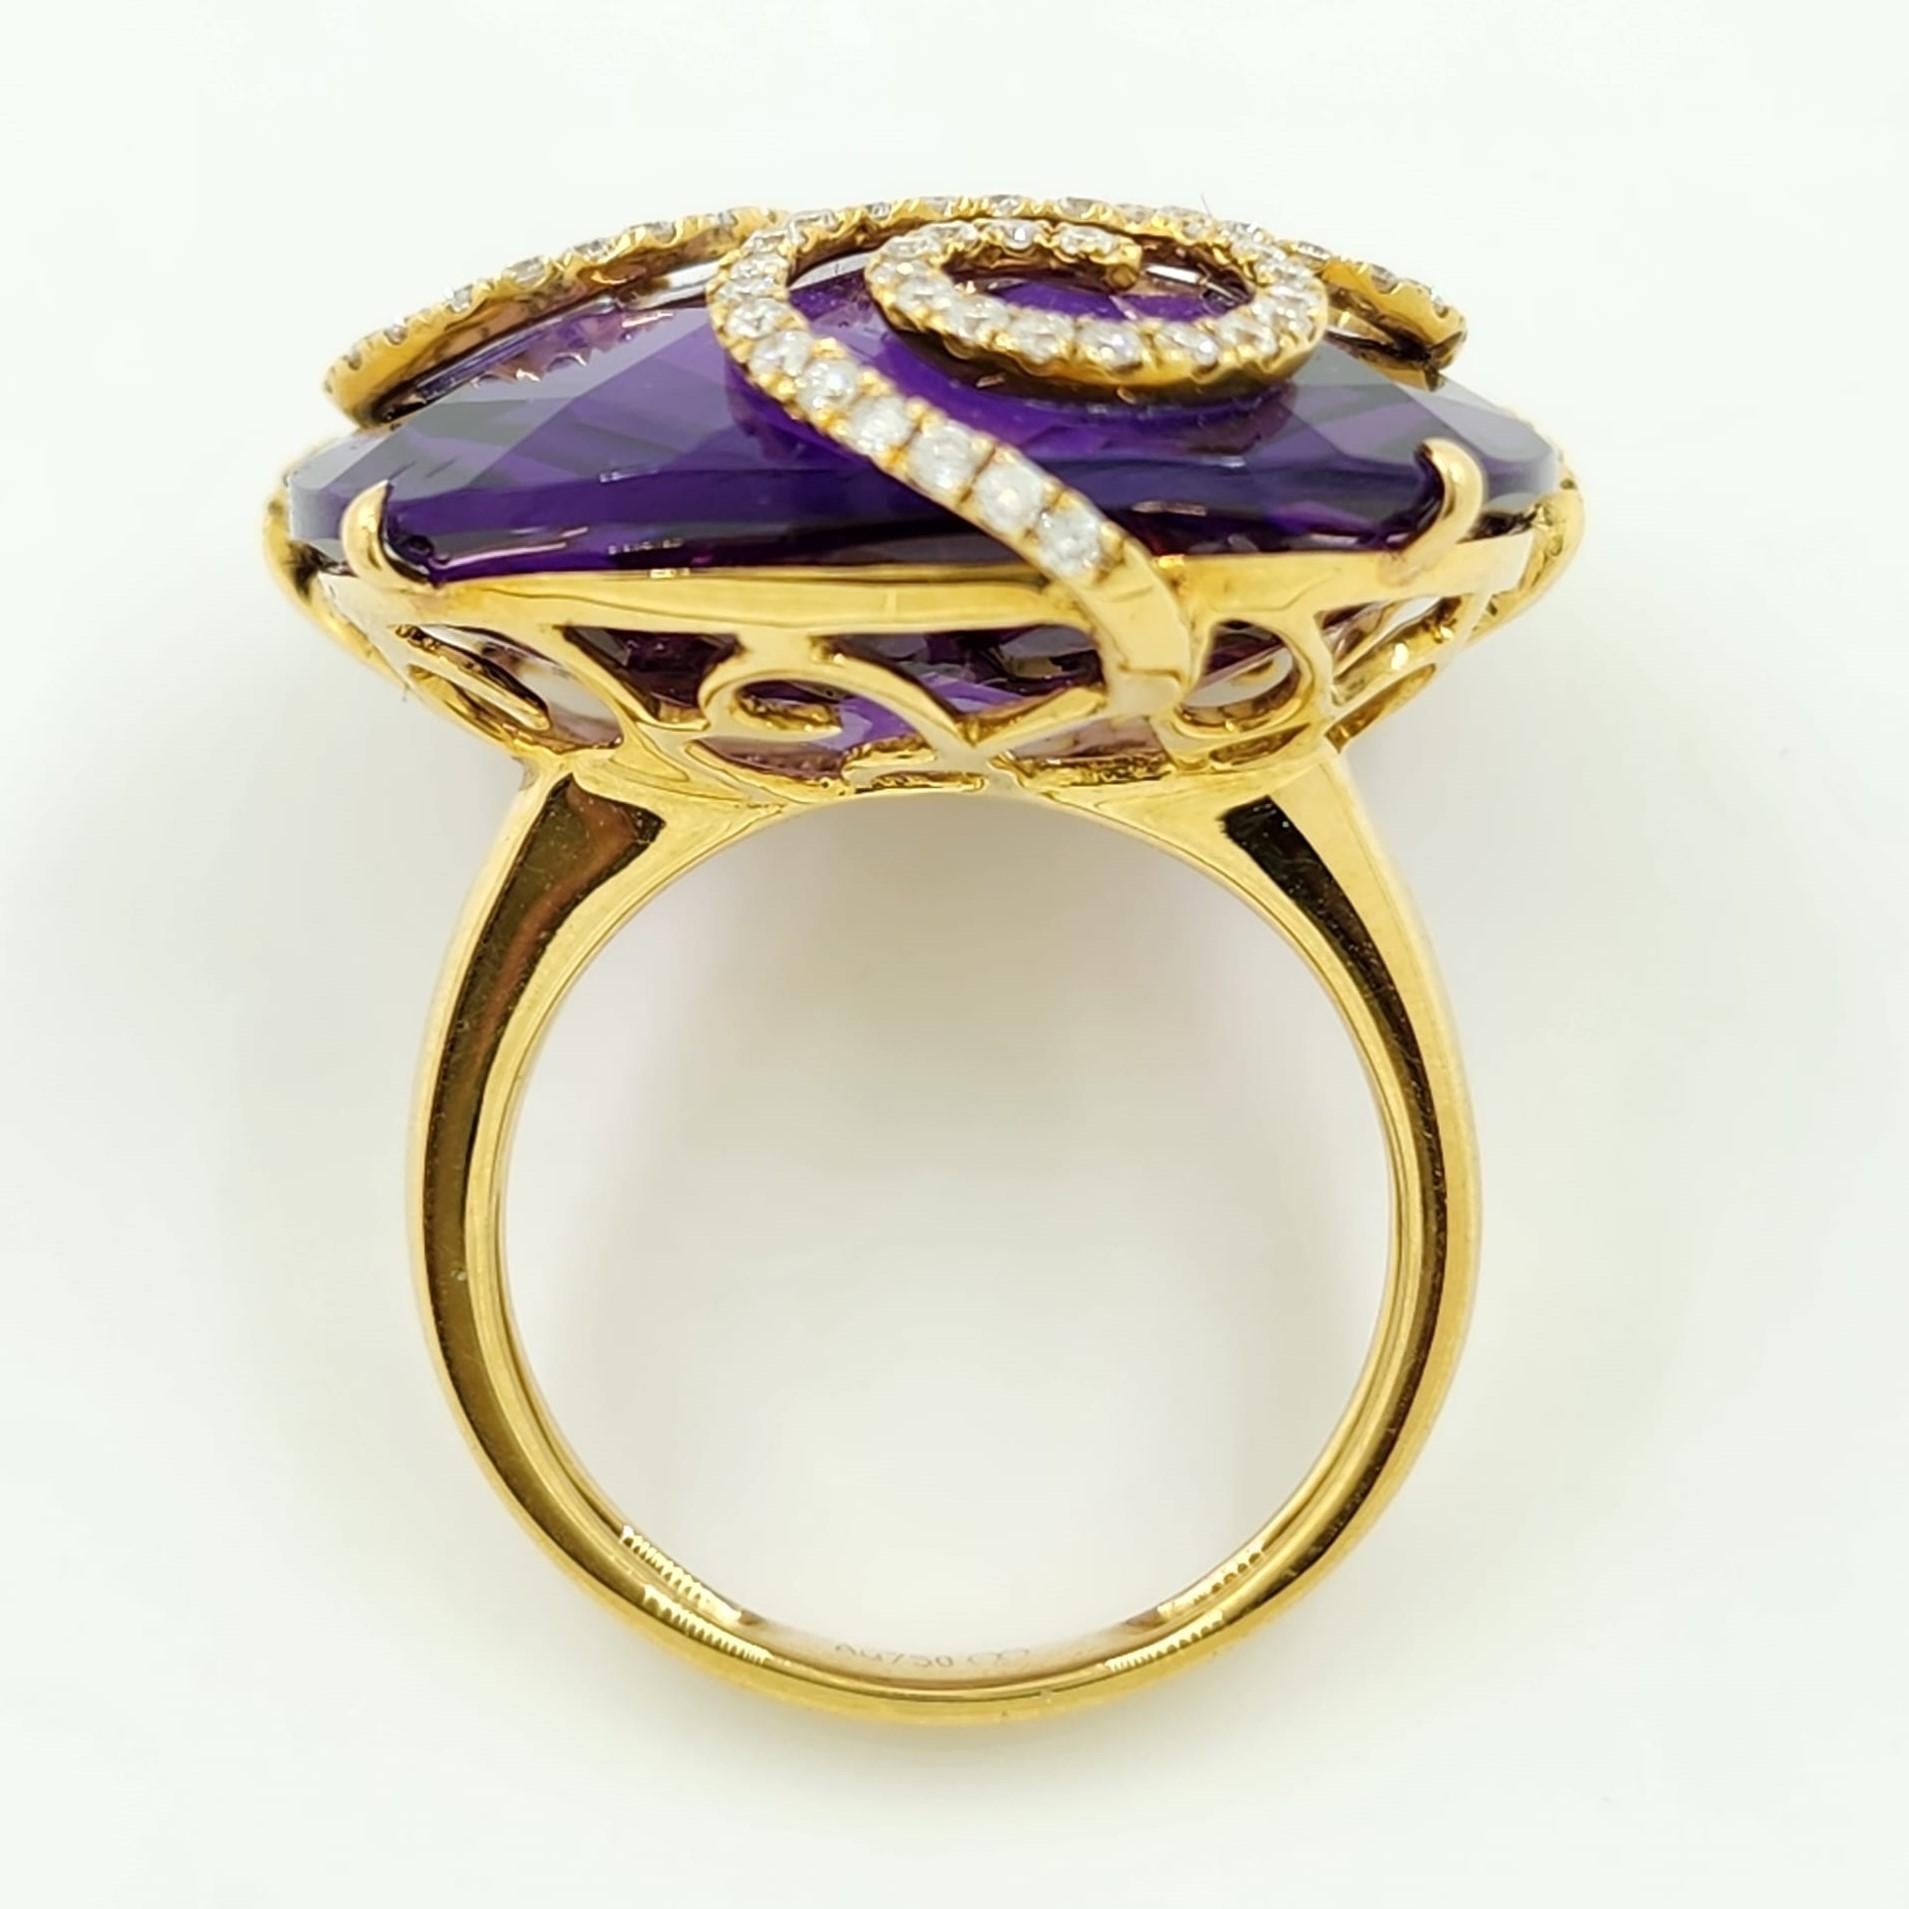 Contemporary 32.78 Carat Amethyst Diamond Cocktail Ring in 18 Karat Yellow Gold For Sale